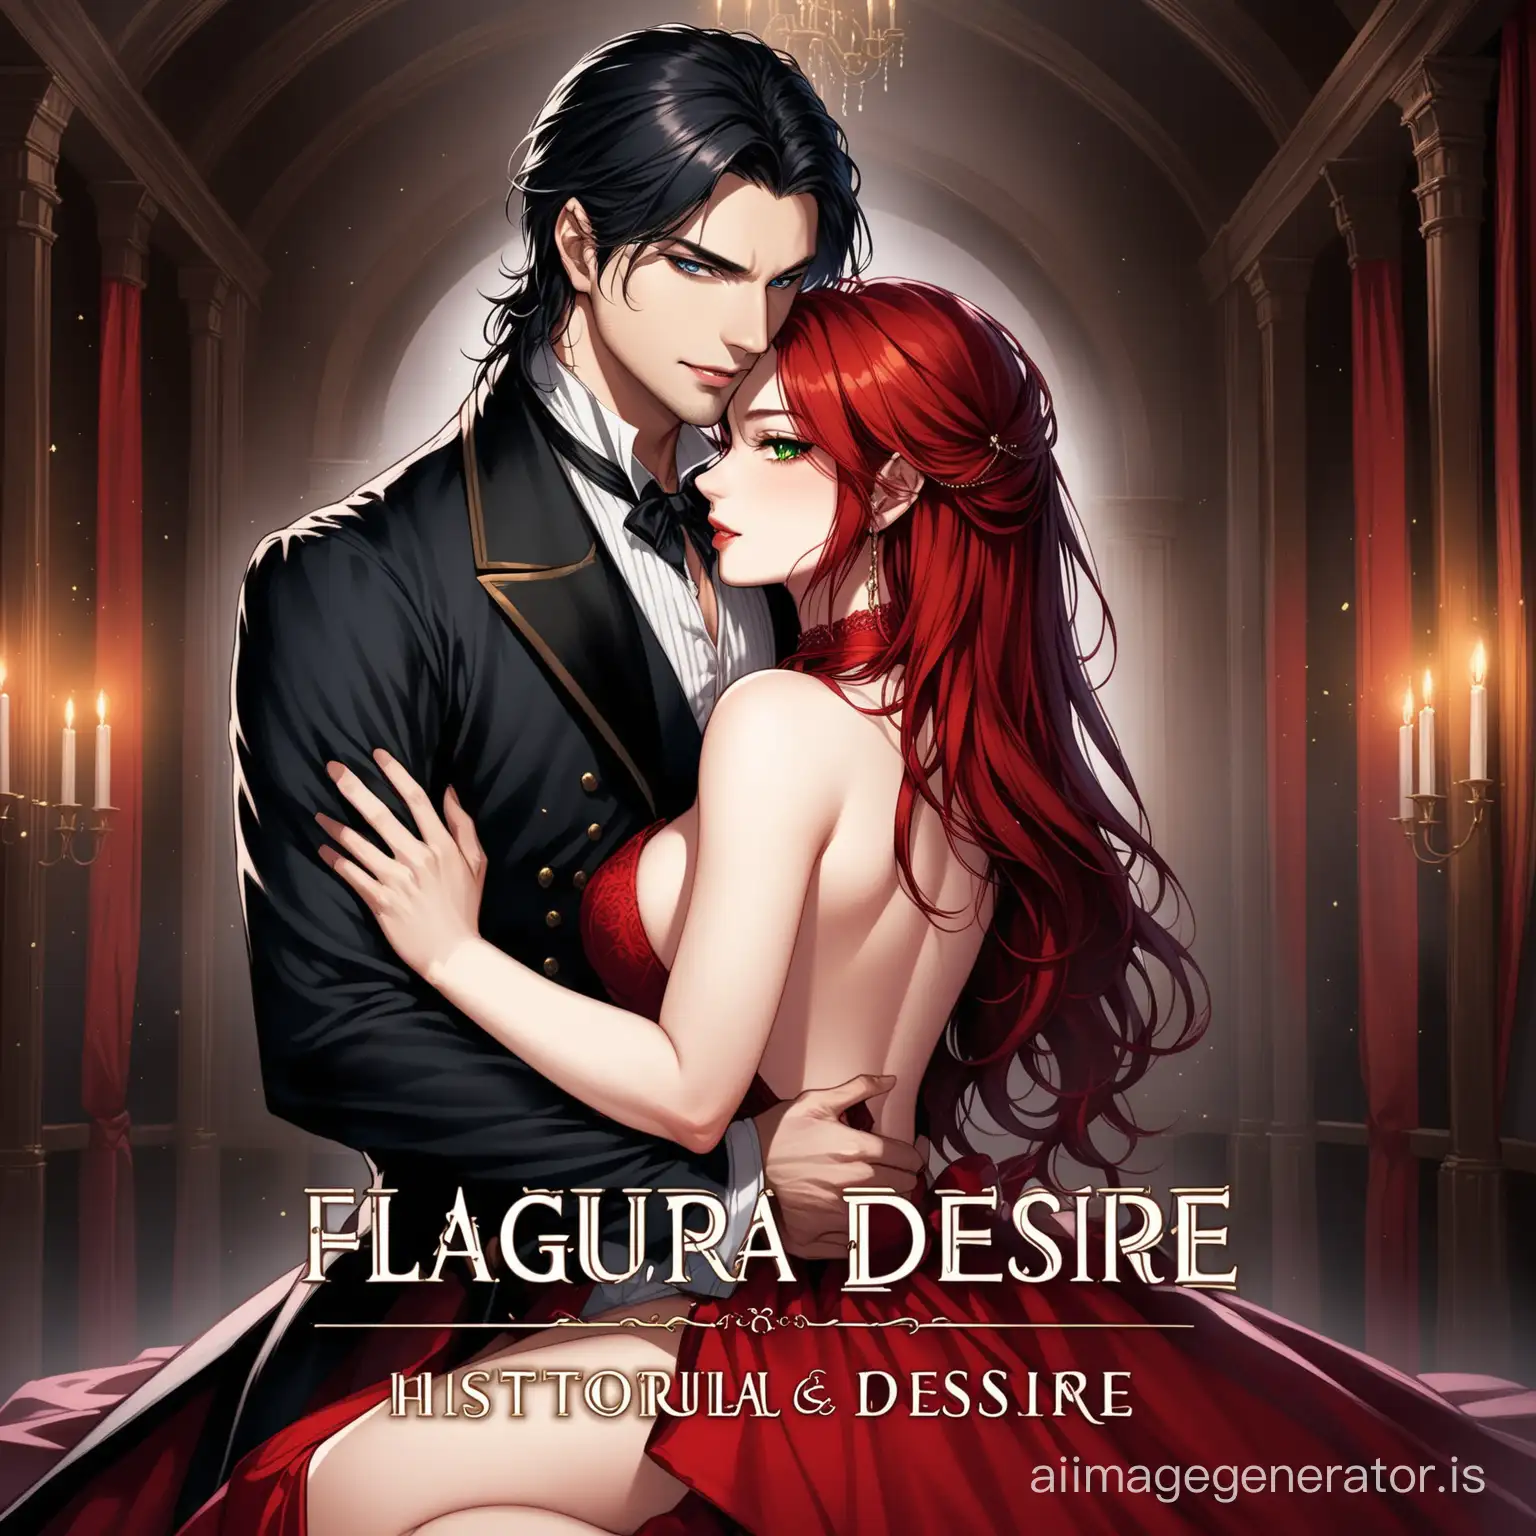 A very handsome vampire with black hair and blue eyes with a very beautiful courtesan with red hair and green eyes. They'd be sitting in an sensual position from the back with his hand wrapped around her throat. Historical. In a Pleasure house. Should be beautiful and realistic. Fit for a Webnovel book cover with the name Facade of Desire written elegantly and the author's name bluebeeryl written below.